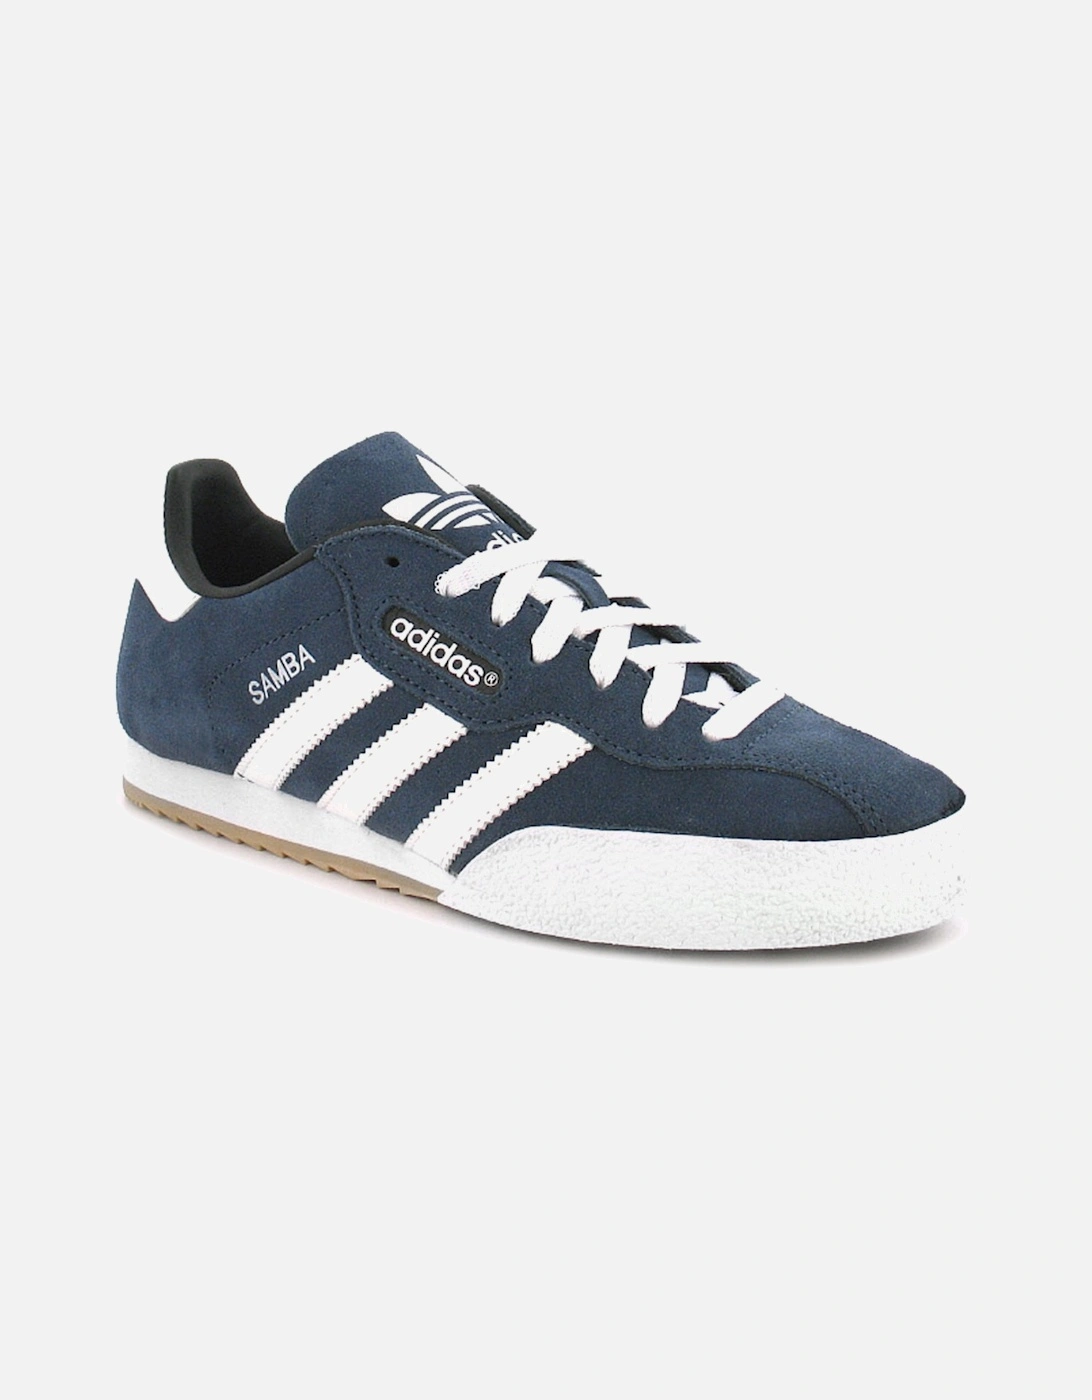 Mens Trainers Samba Super Suede Leather Lace Up navy white UK S, 6 of 5